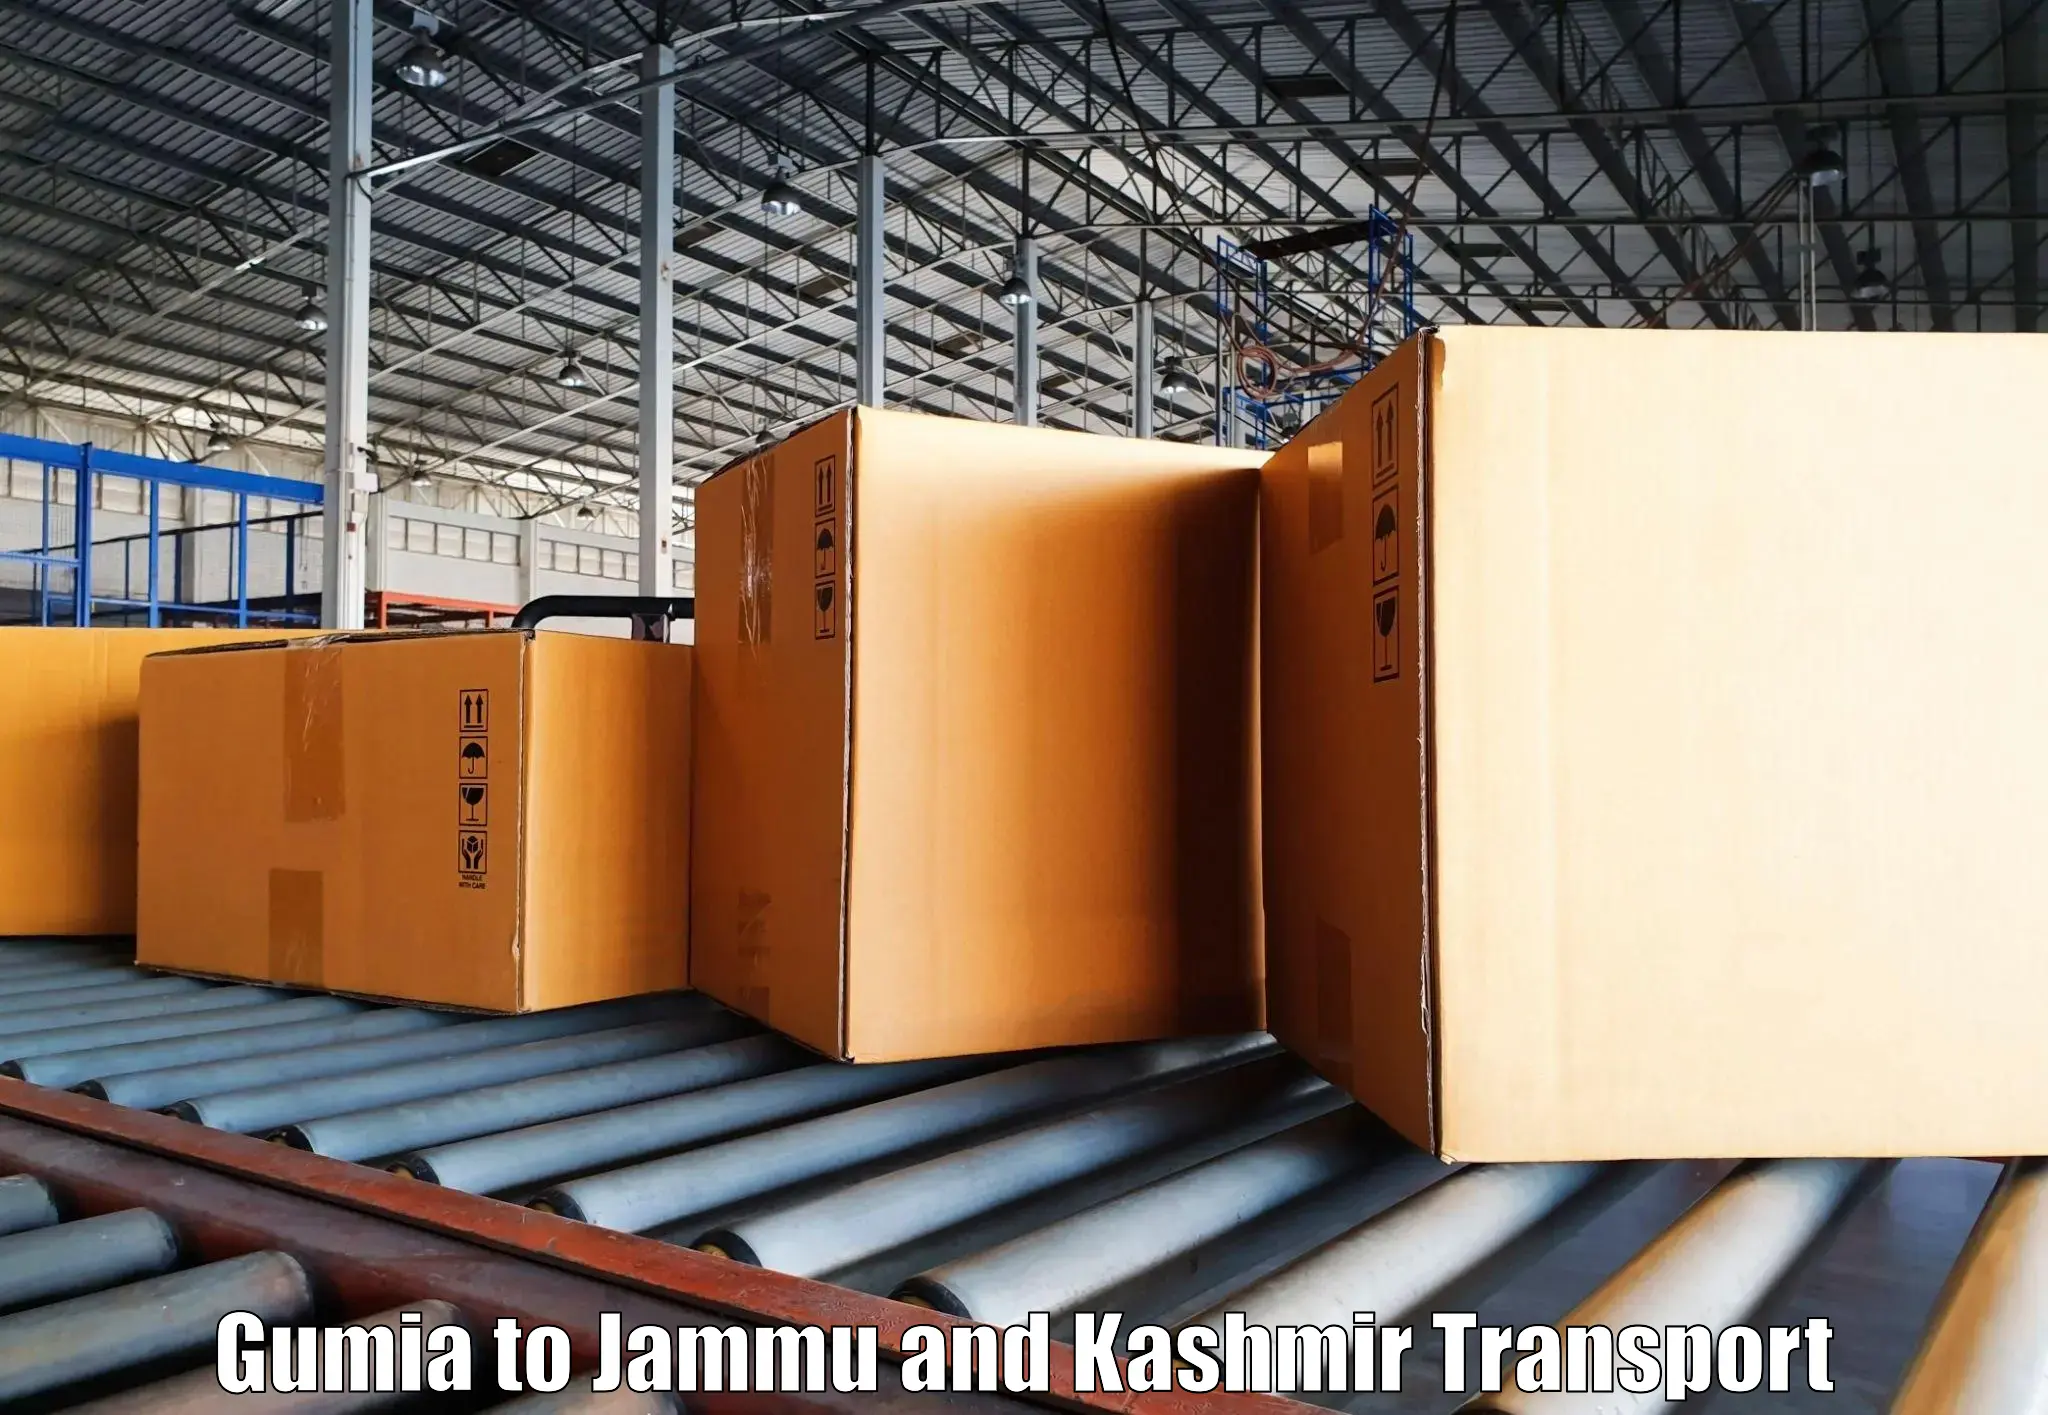 Transport shared services Gumia to Jammu and Kashmir